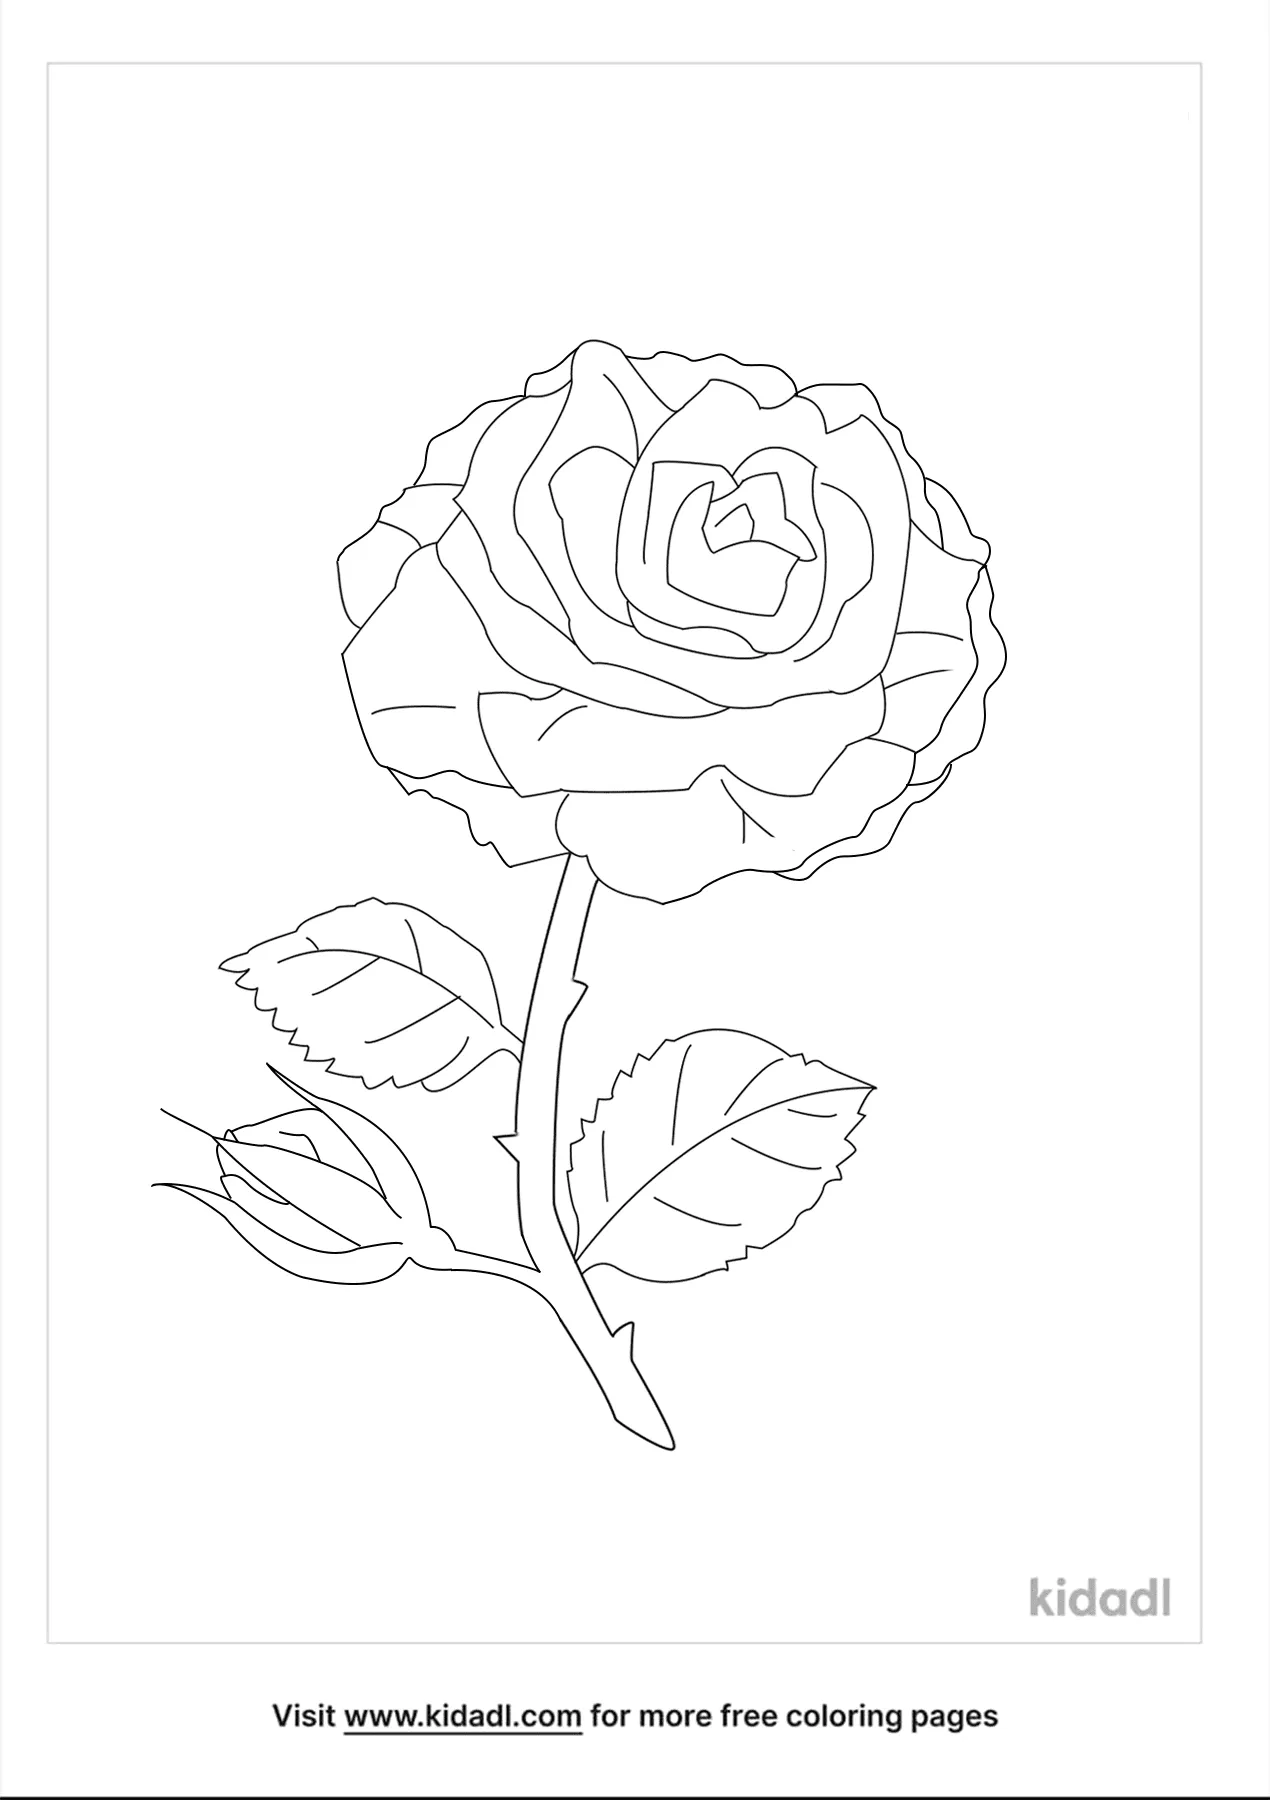 Free great maidens blush rose coloring page coloring page printables